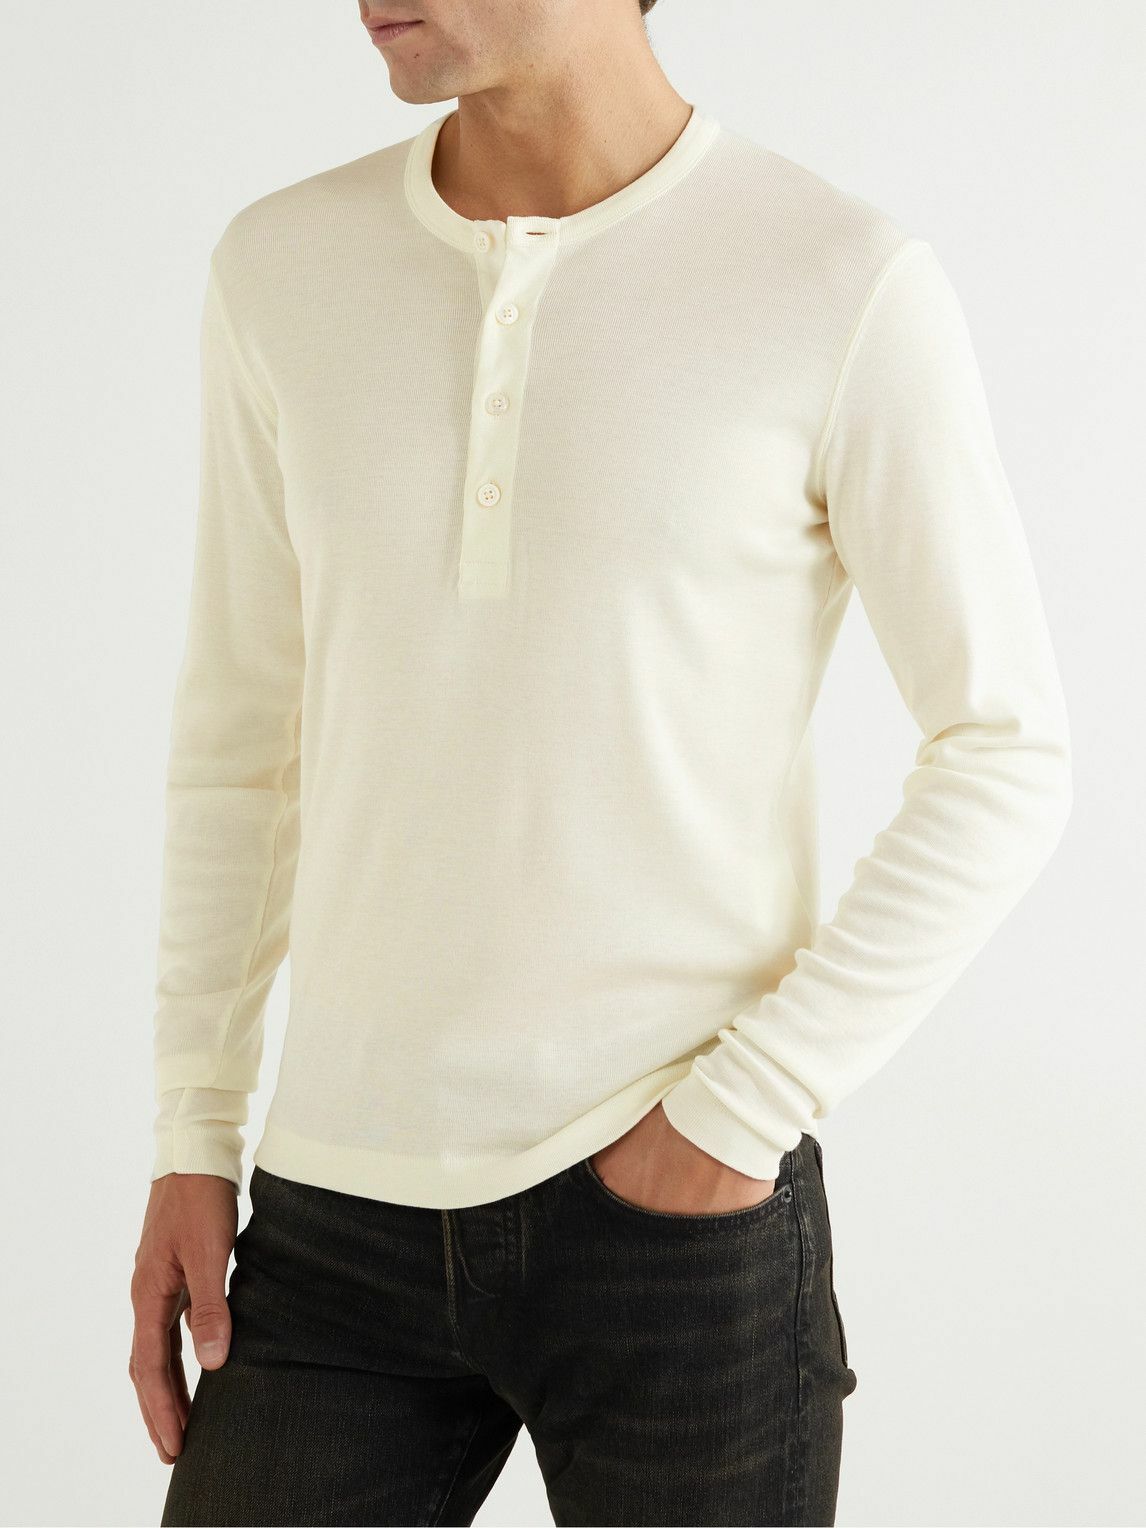 TOM FORD - Tencel and Cotton-Blend Jersey Henley T-Shirt - Neutrals TOM FORD